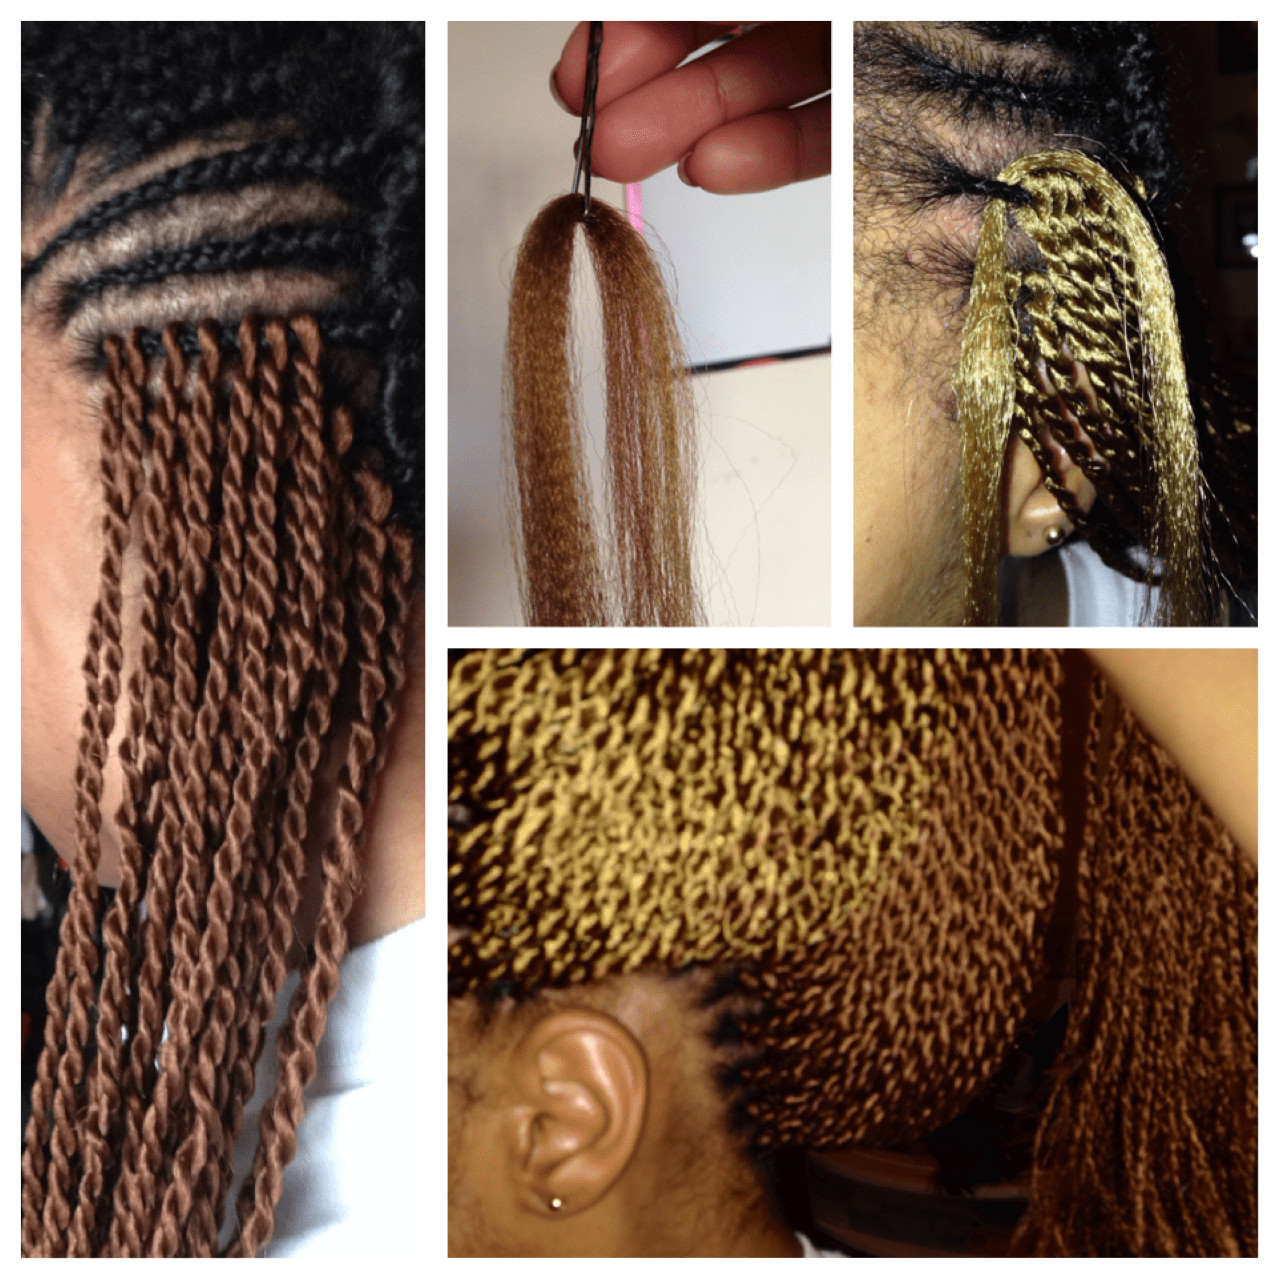 Senegalese Twist Crochet Hairstyles
 How I Crocheted Micro Senegalese Twists into My Hair